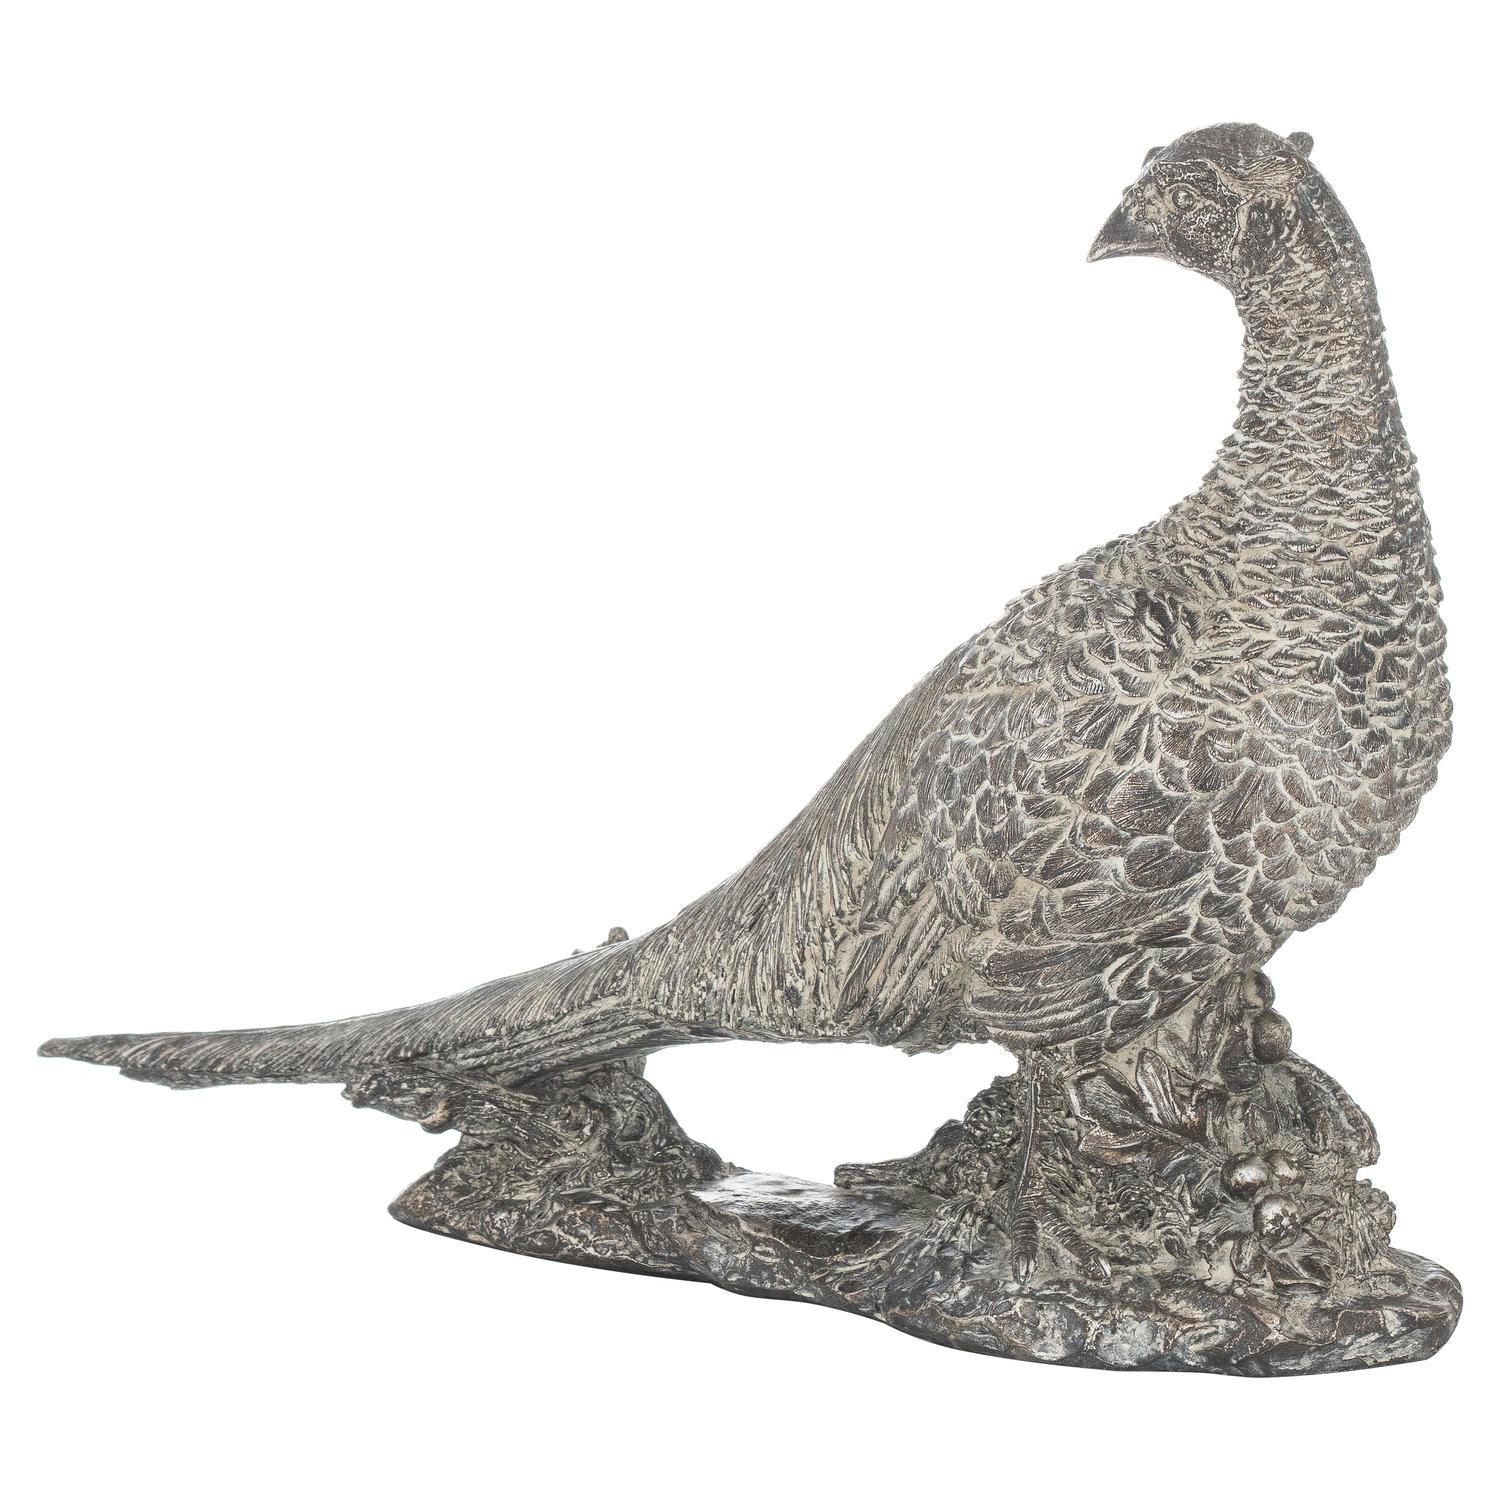 Antique Silver Cock Pheasant Ornament - Vookoo Lifestyle